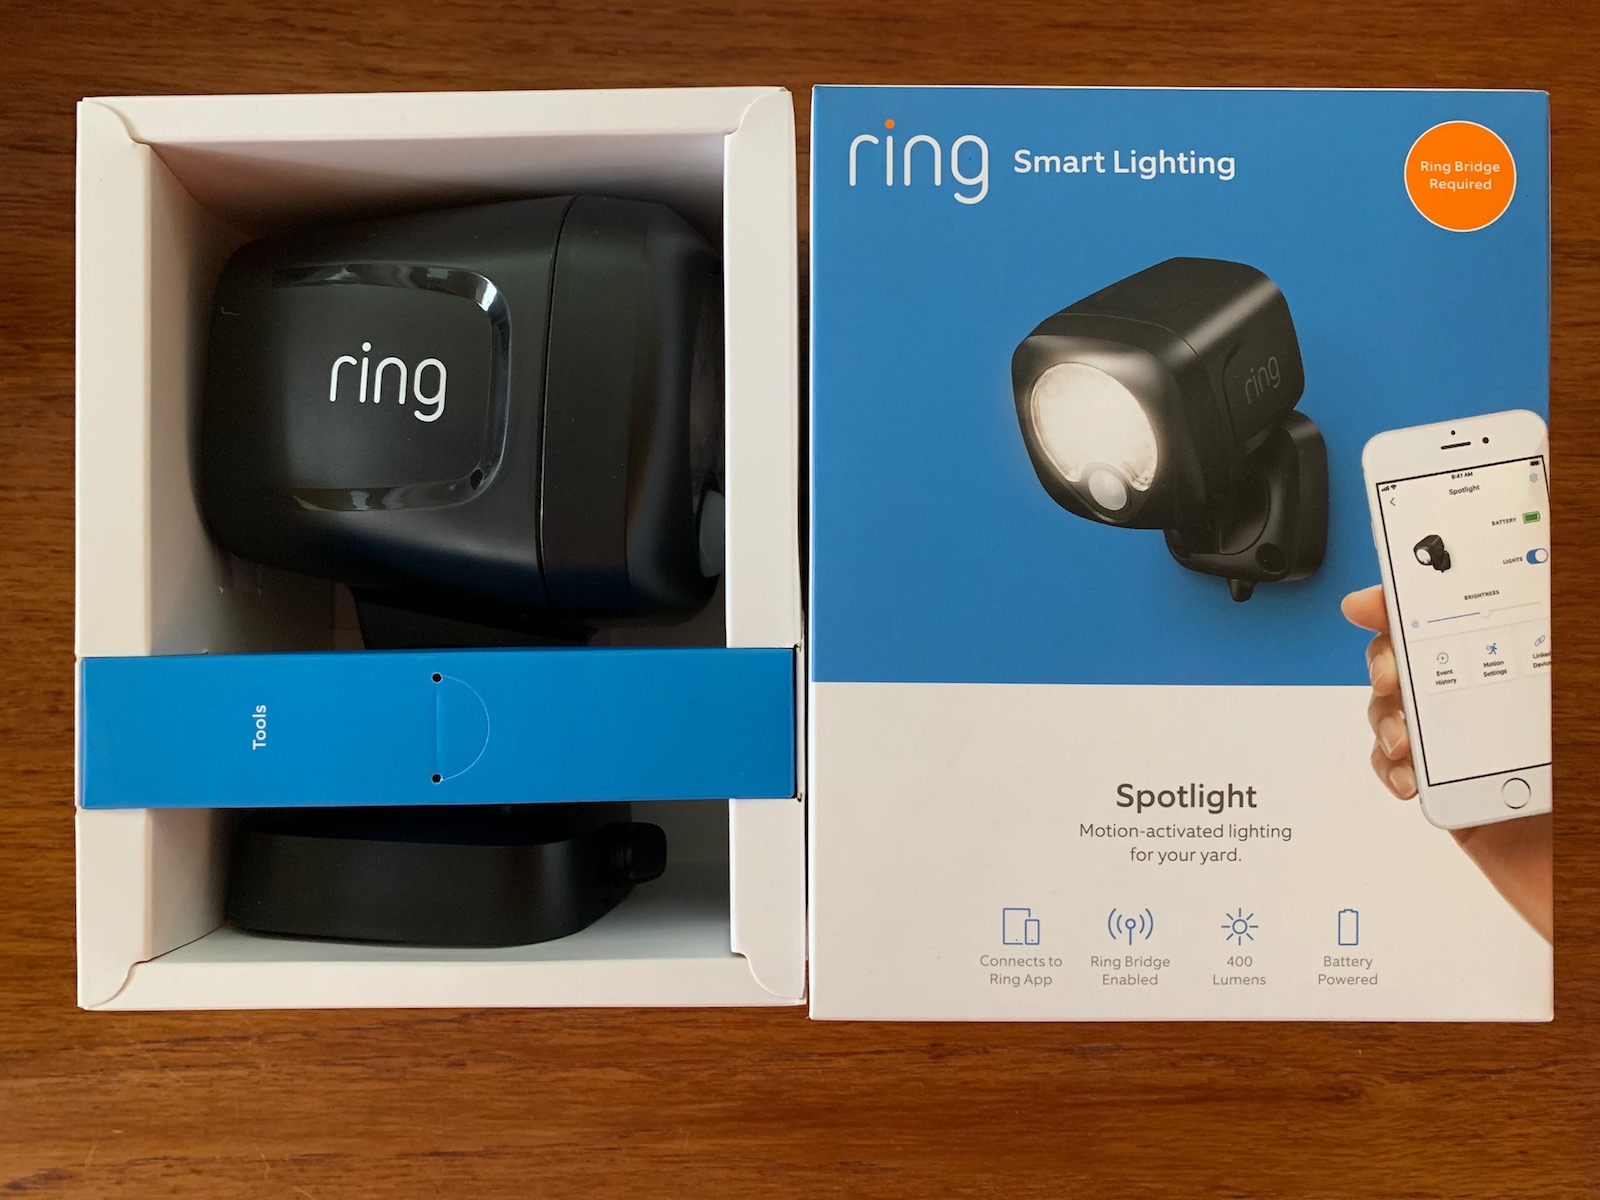 Review of Ring Lighting: Smart Wireless Home Security Lights